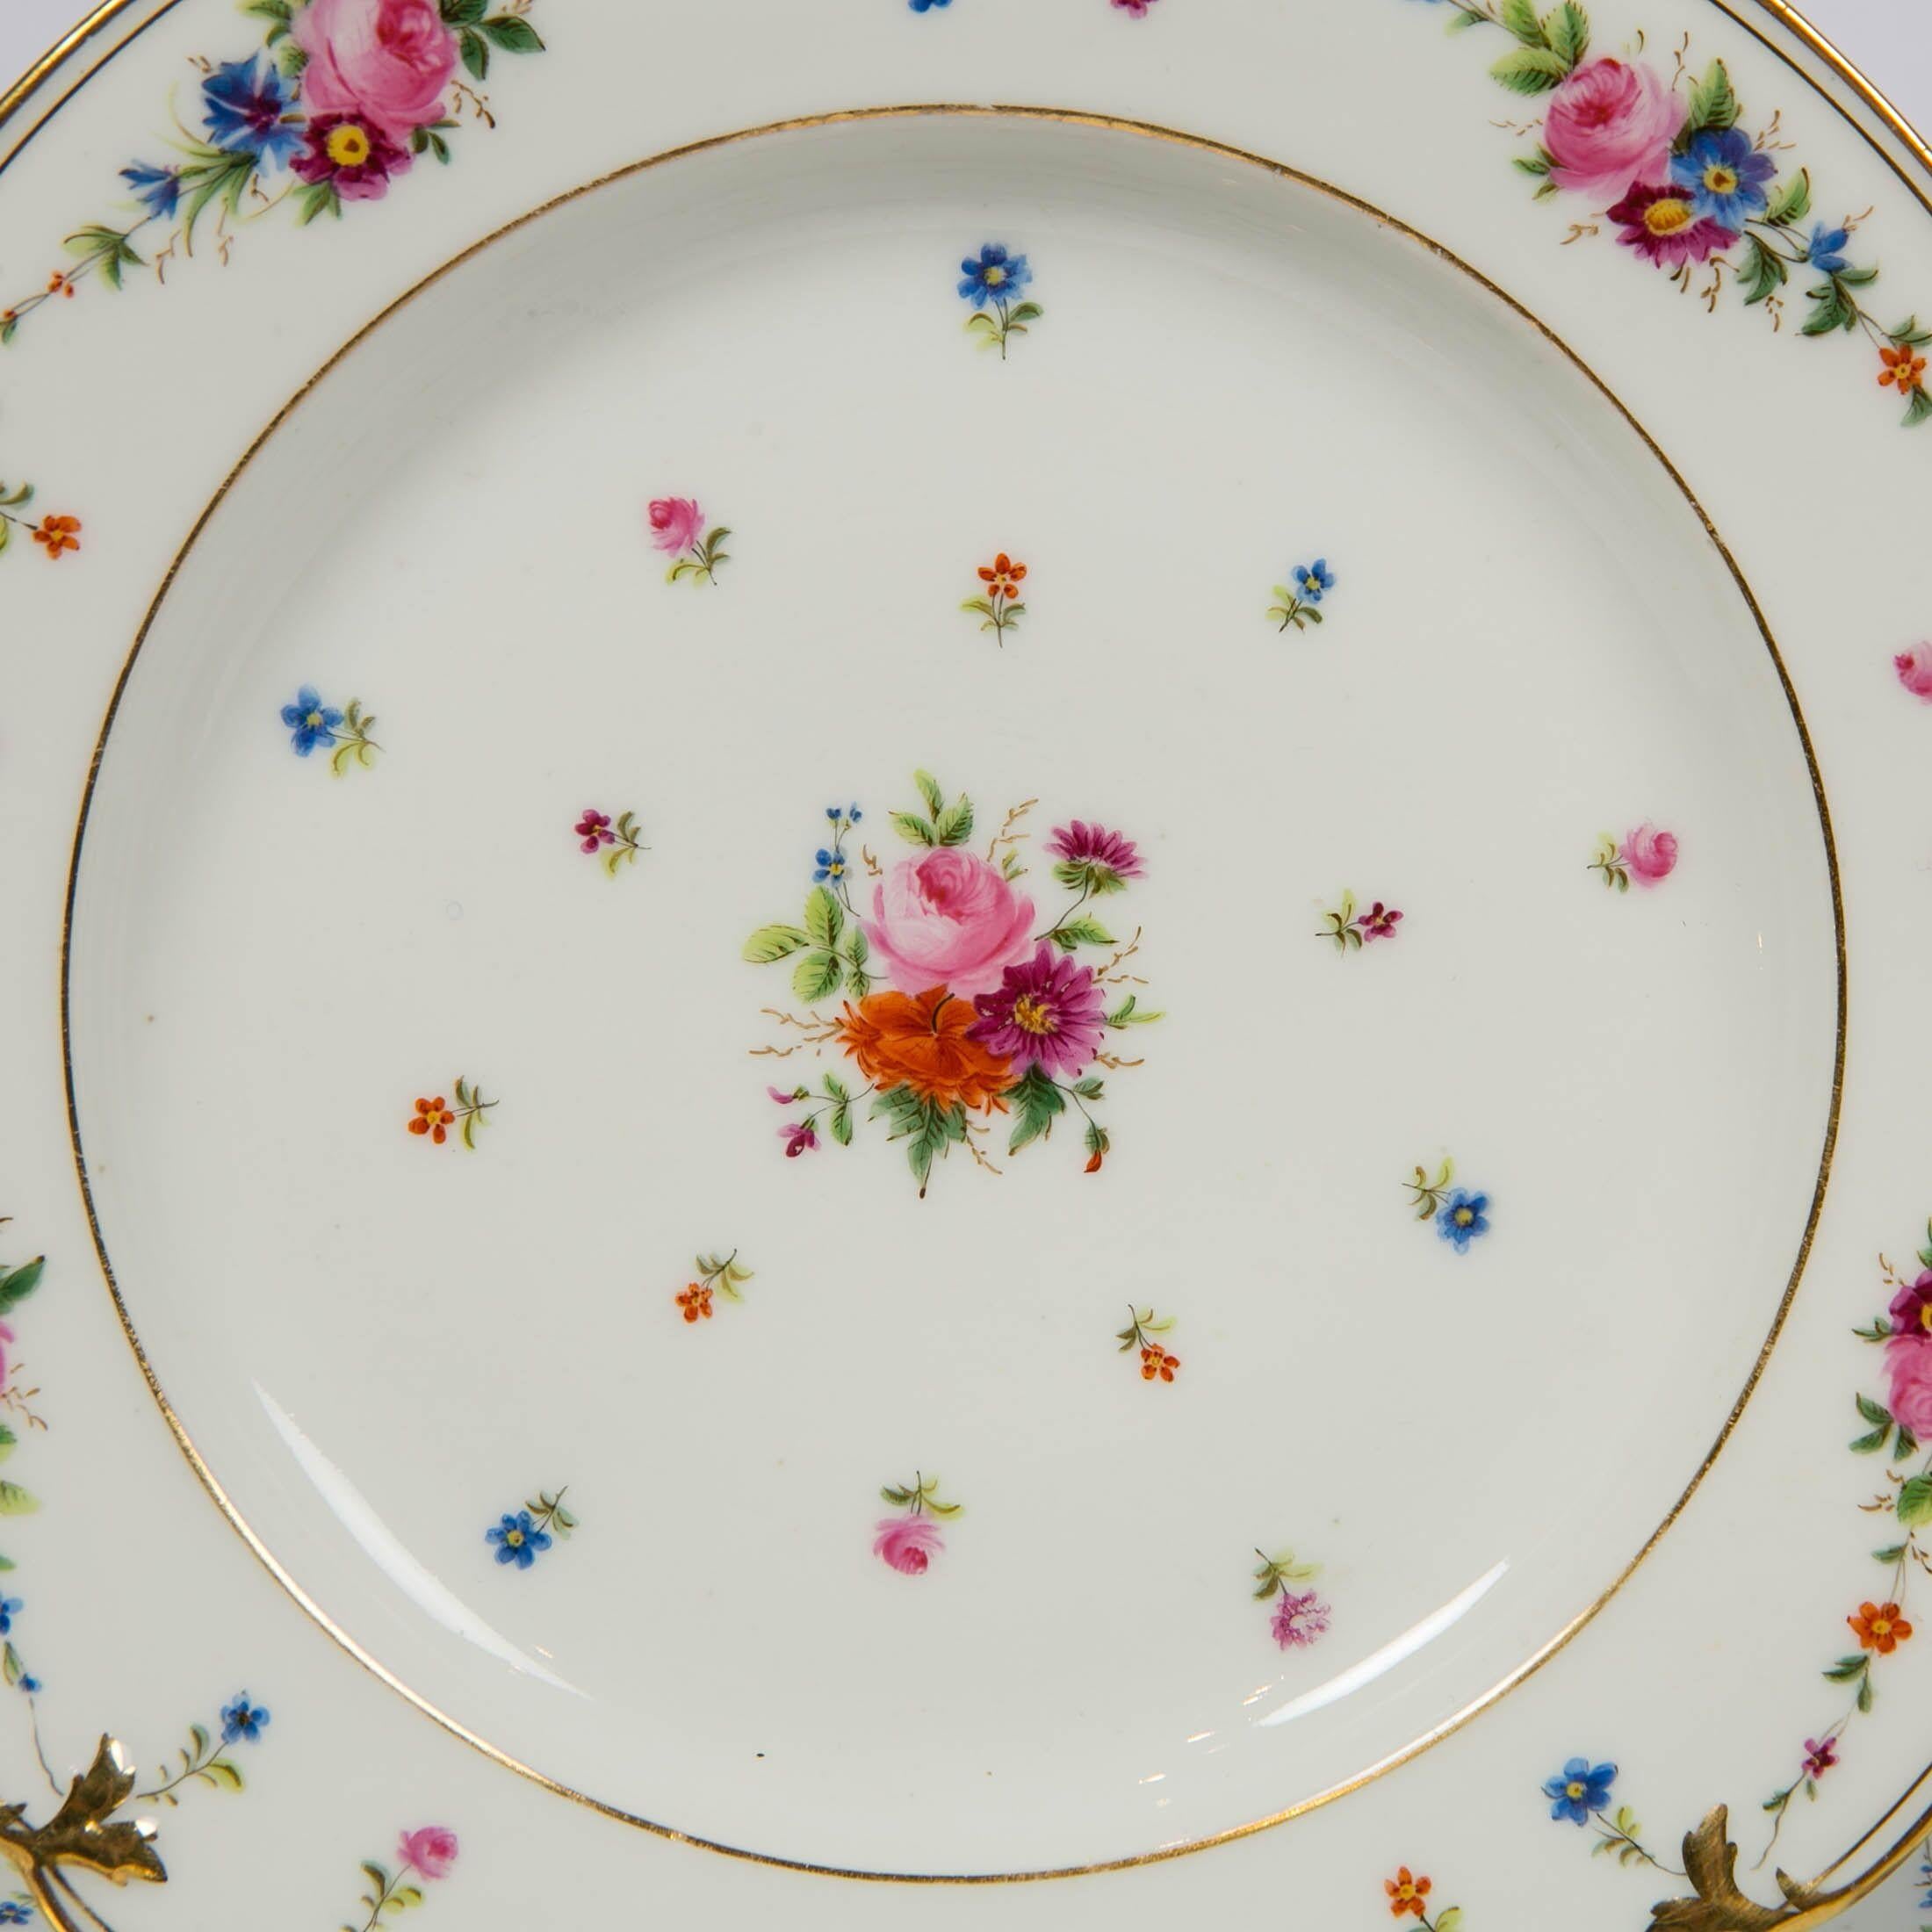 We are pleased to offer this set of seven French dessert dishes made by Eduoart Honoré, circa 1840. Eduoard Honoré was one of the best of the Paris porcelain manufacturers in the first half of the 19th century. These beautiful hand-painted dishes